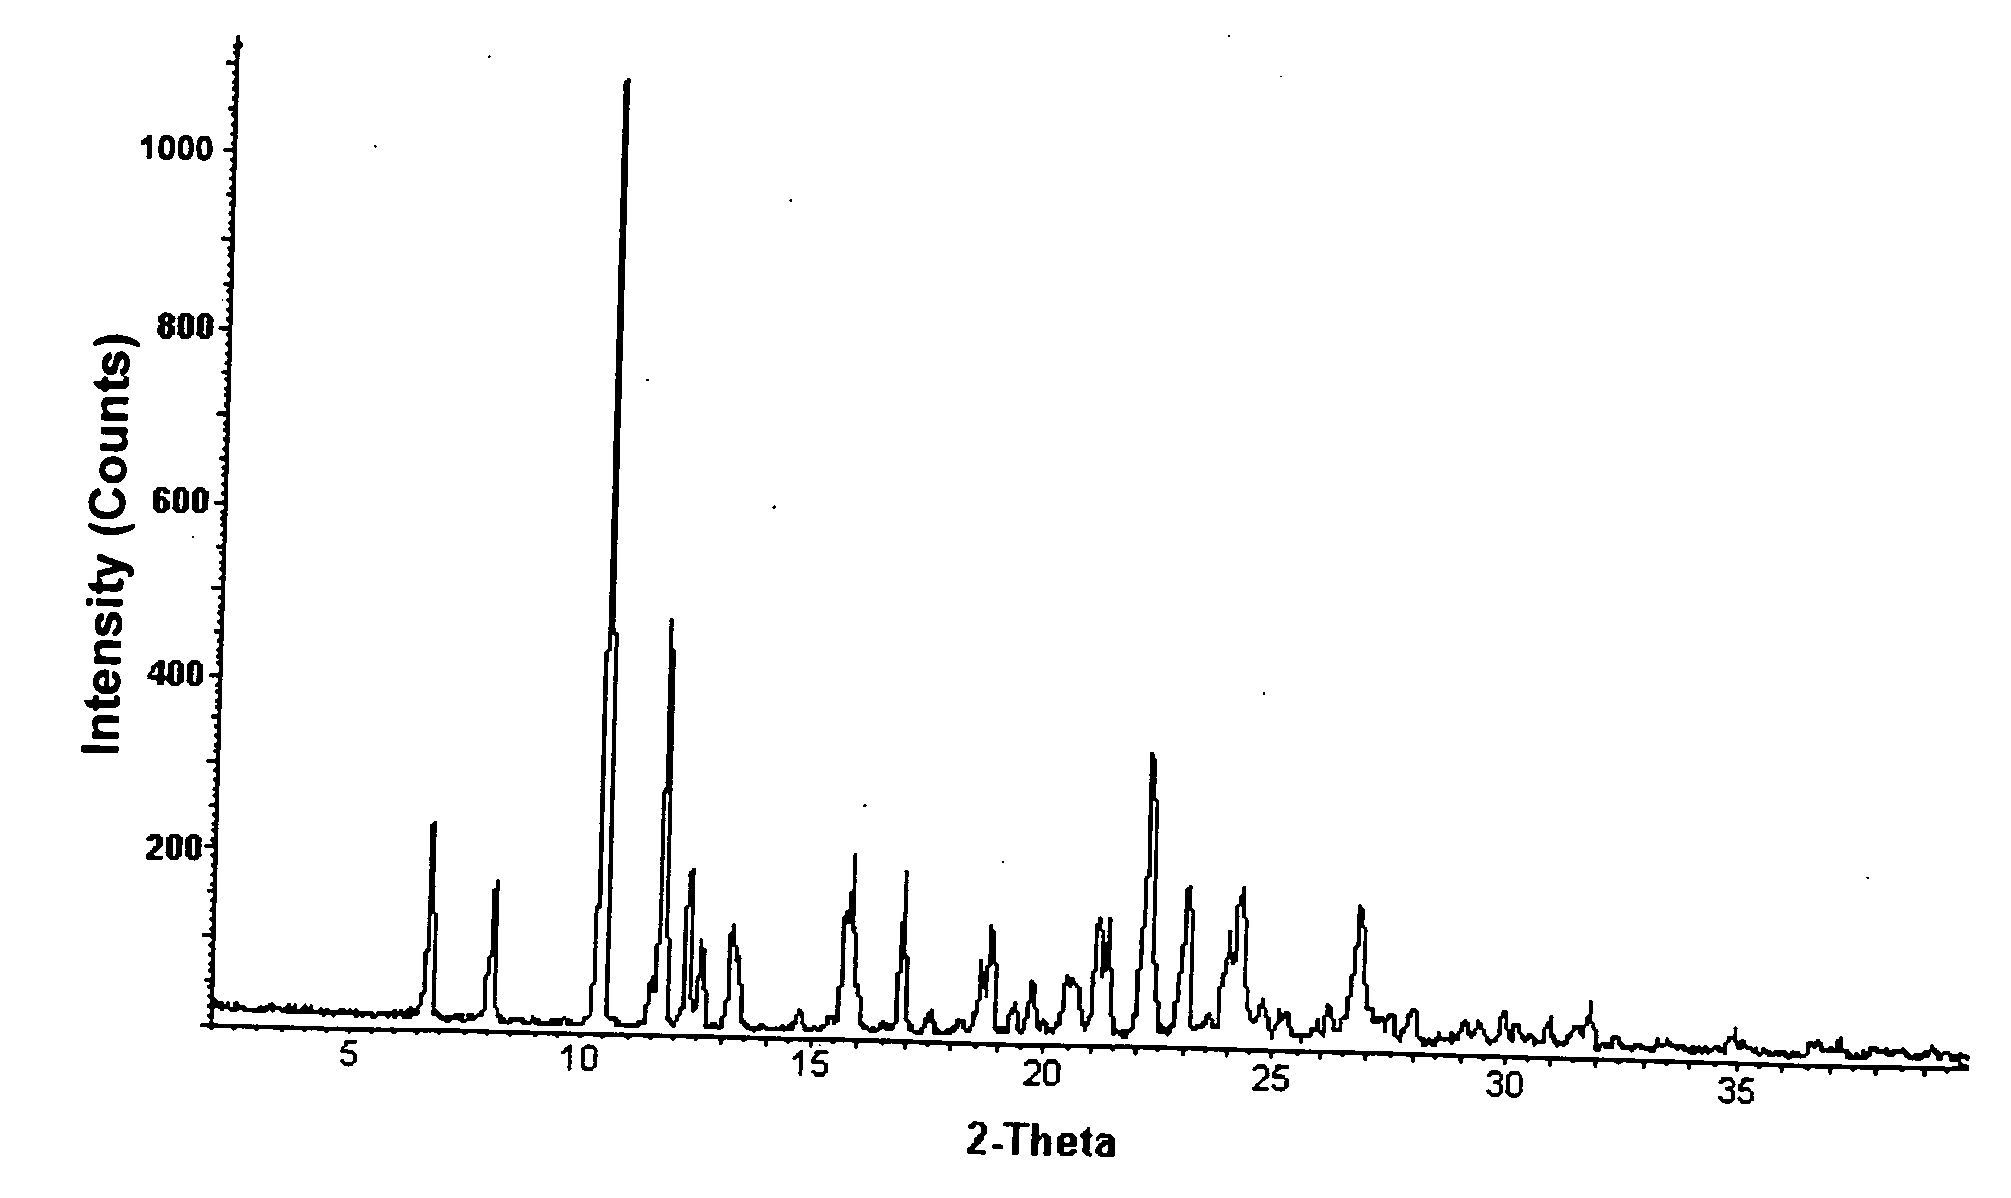 Salt and crystalline form thereof of a corticotropin releasing factor receptor antagonist